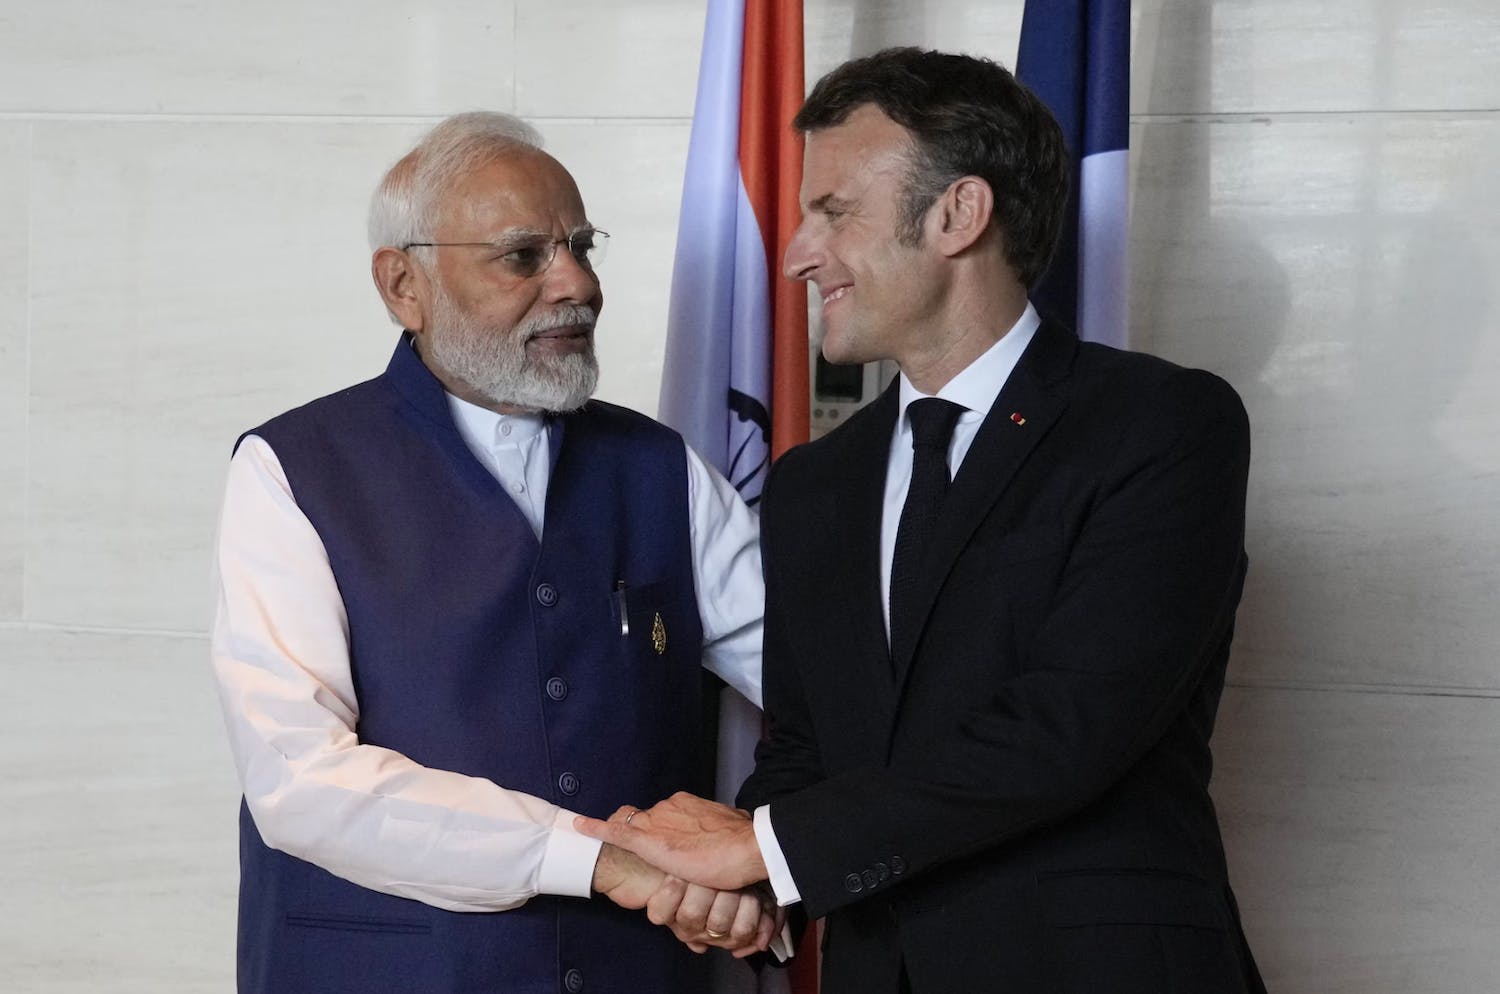 Emmanuel Macron's participation as guest of honor on India's Constitution Day sends worrying political signals